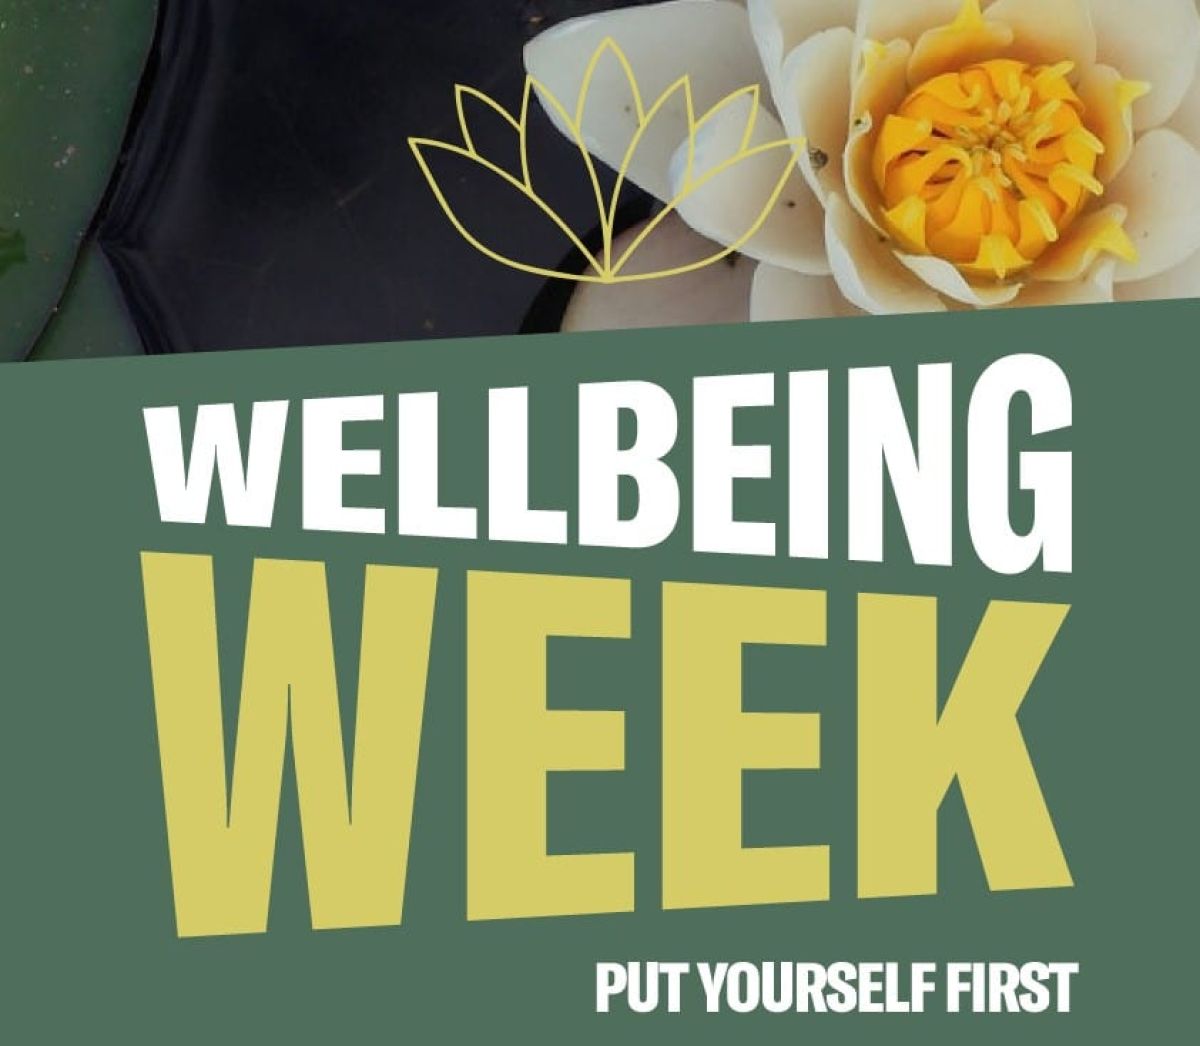 UoM Wellbeing Week arrives to help students destress